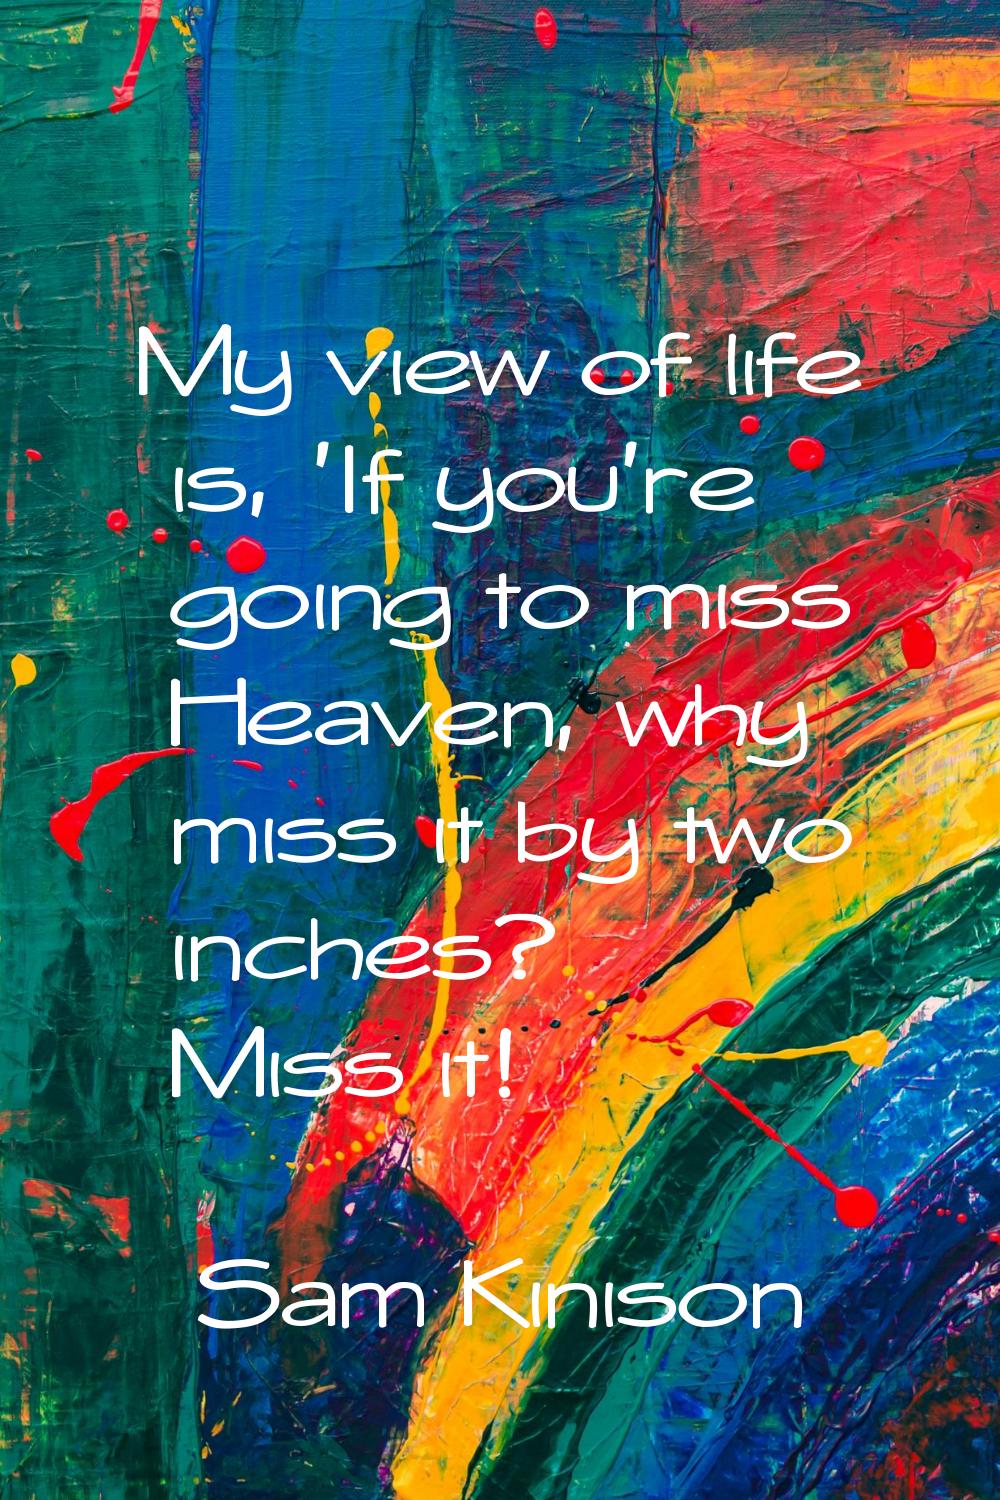 My view of life is, 'If you're going to miss Heaven, why miss it by two inches? Miss it!